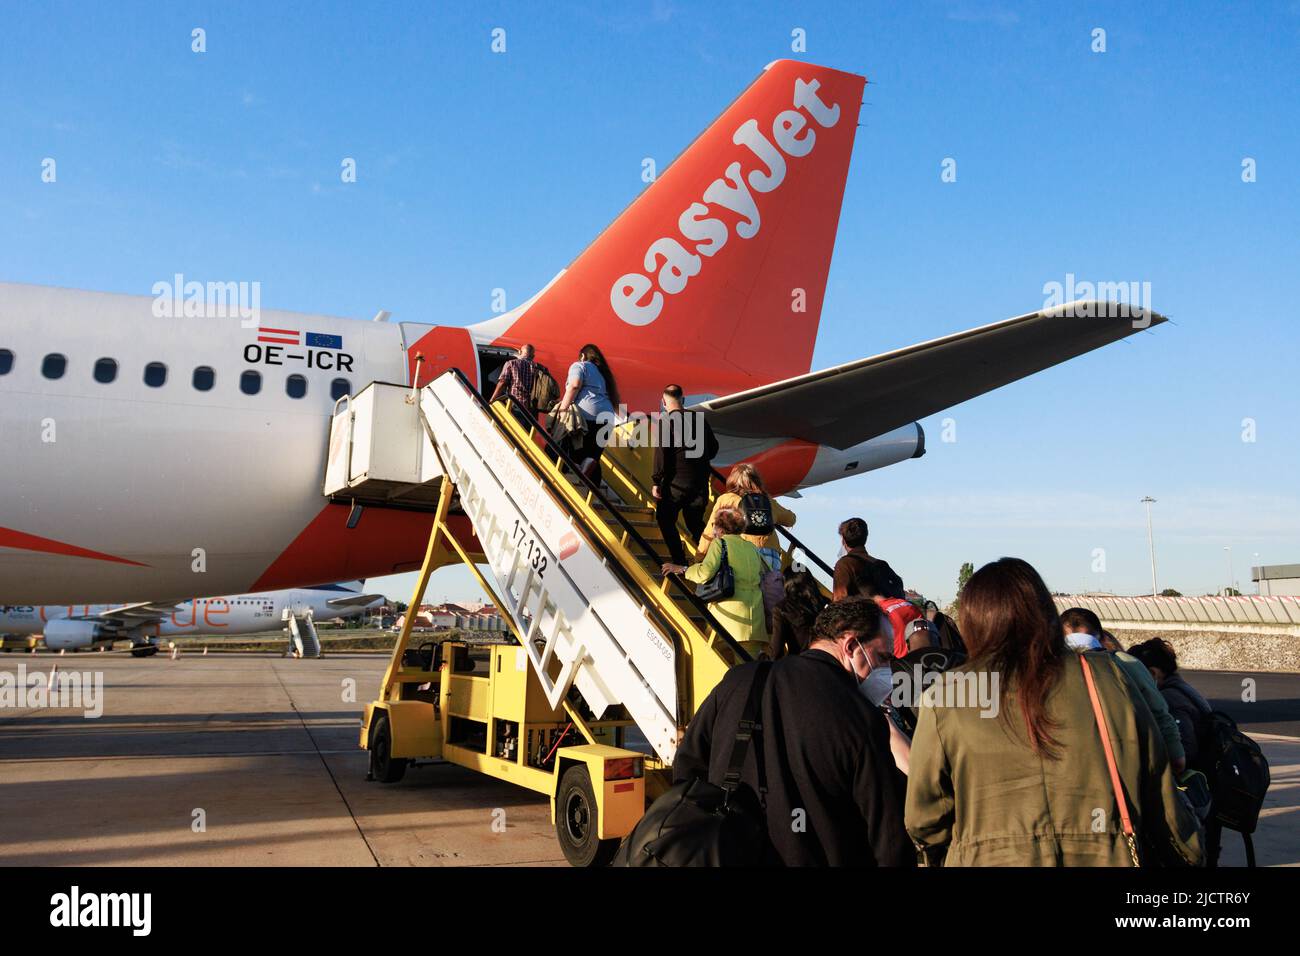 Passengers boarding an Easyjet plane in the early morning at Lisbon airport, Portugal. Stock Photo